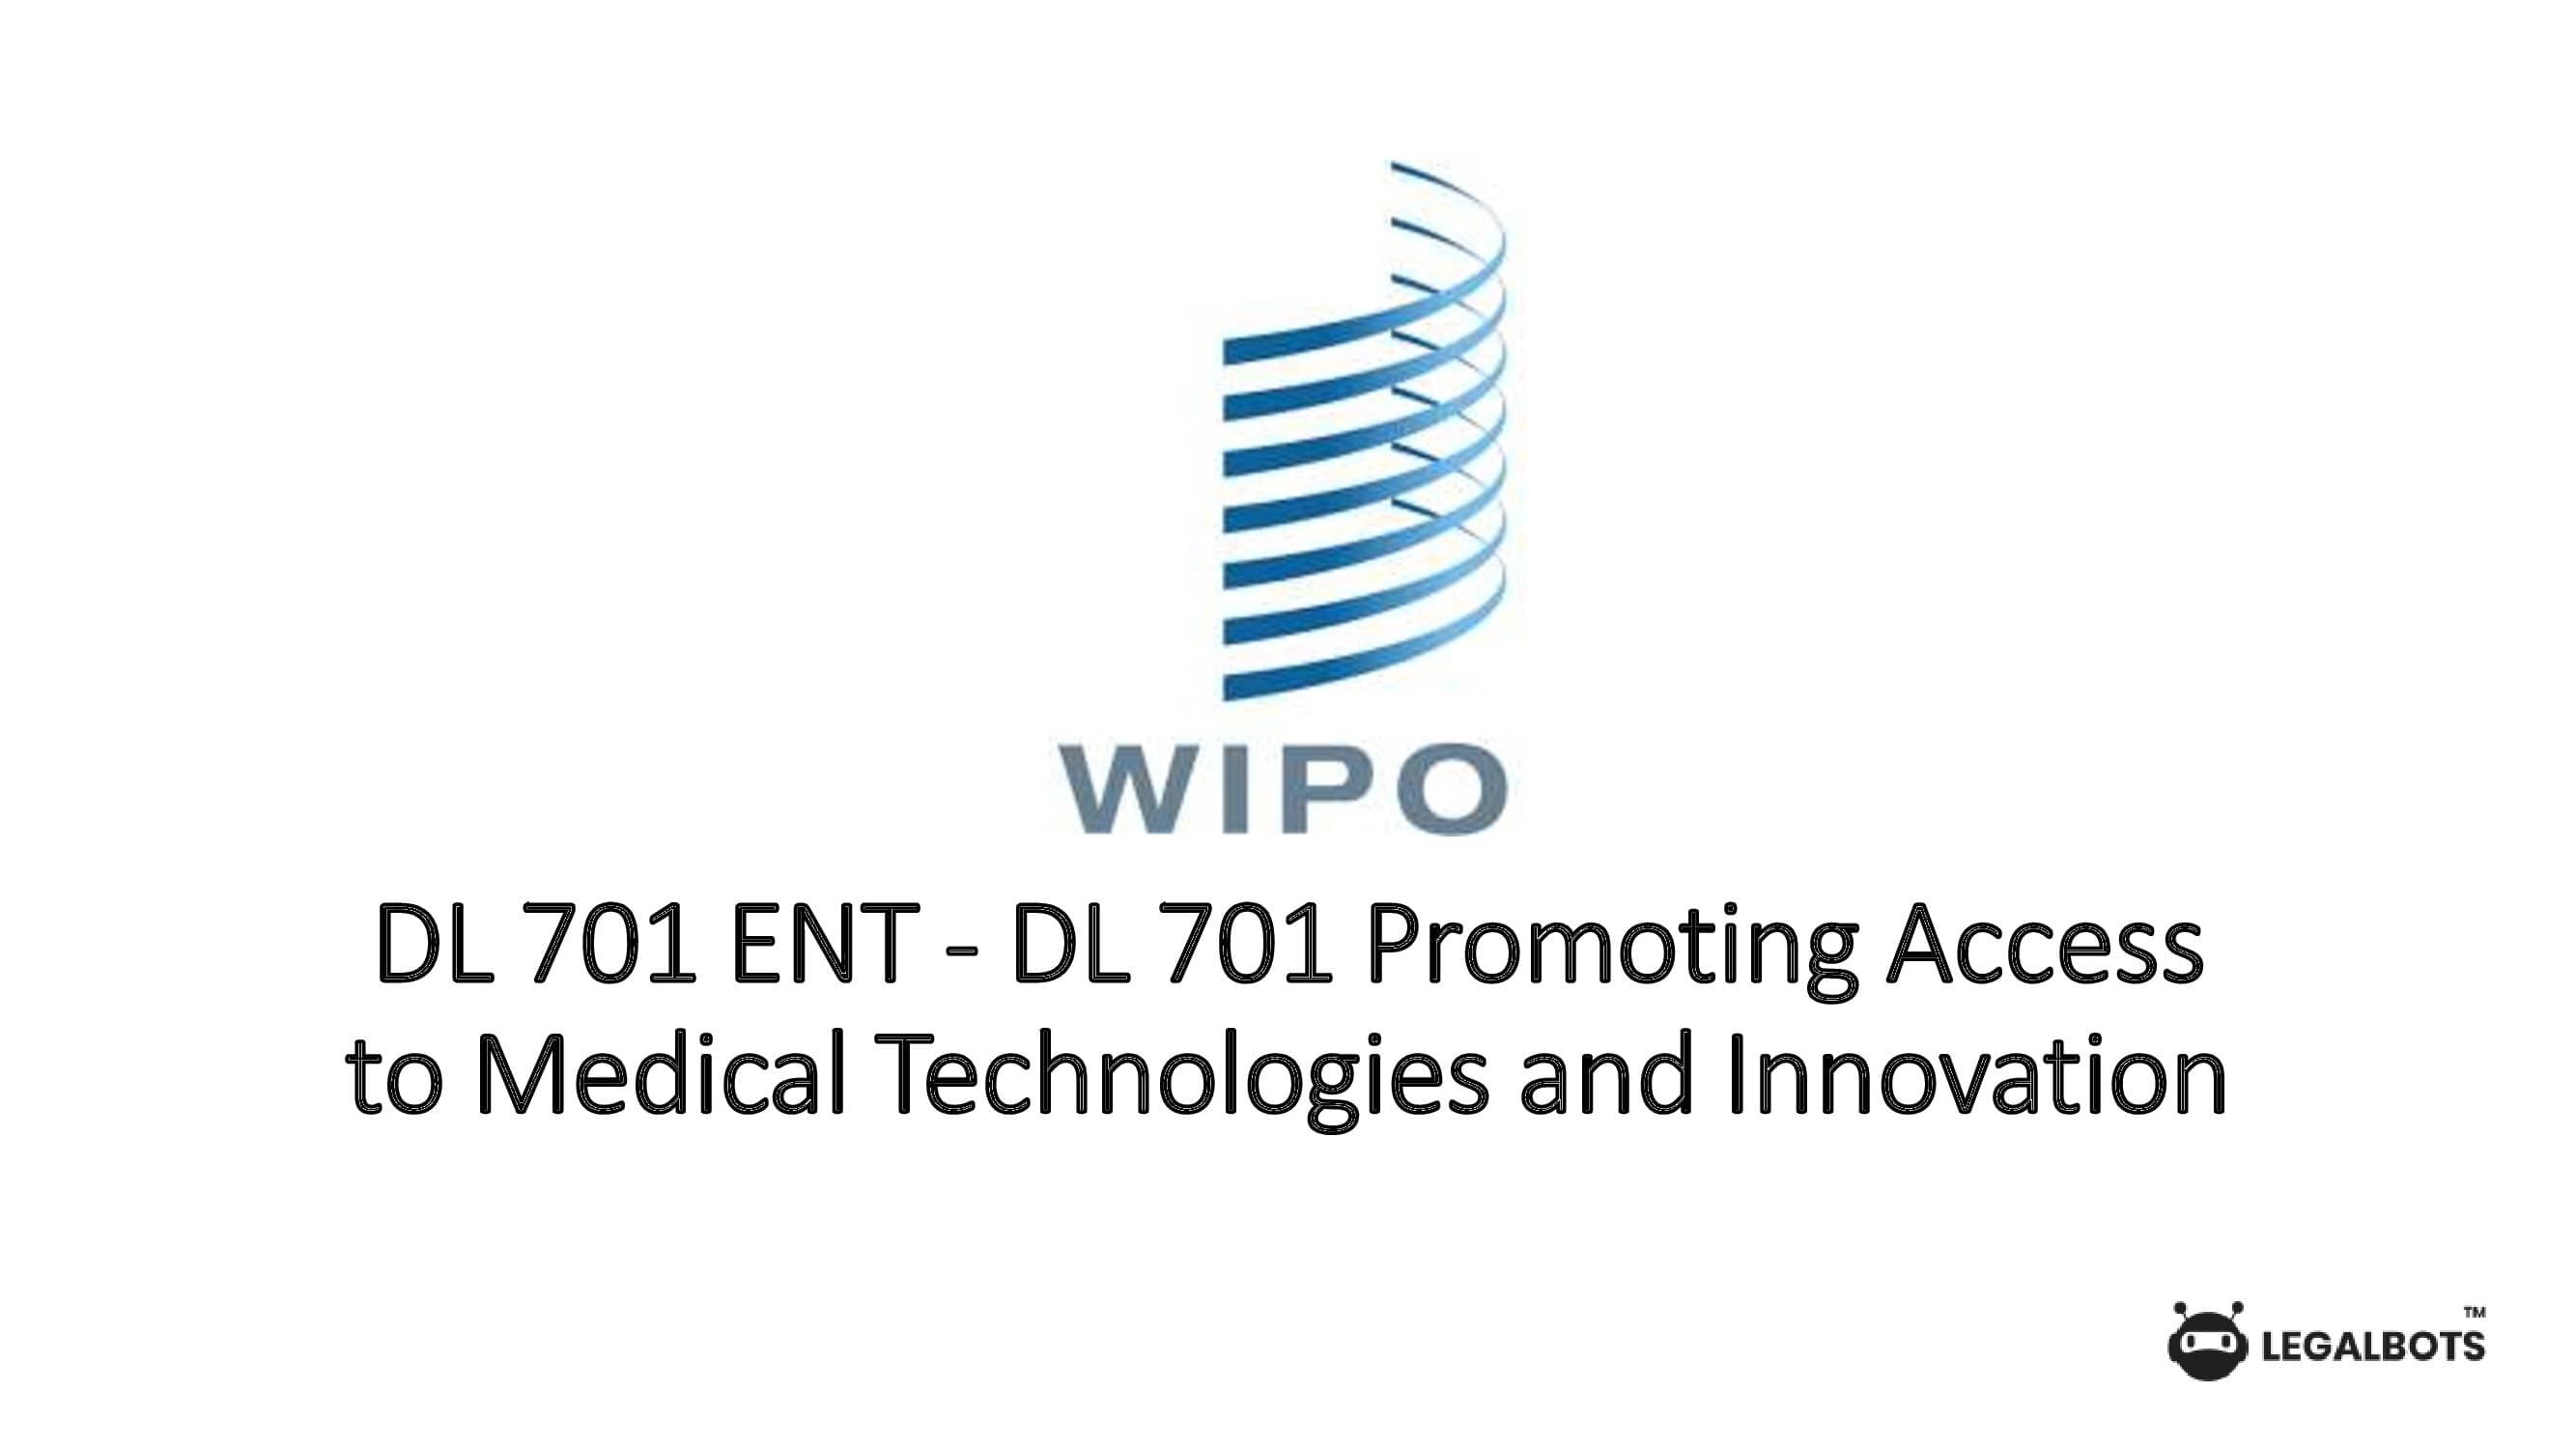 DL 701 ENT - DL 701 Promoting Access to Medical Technologies and Innovation